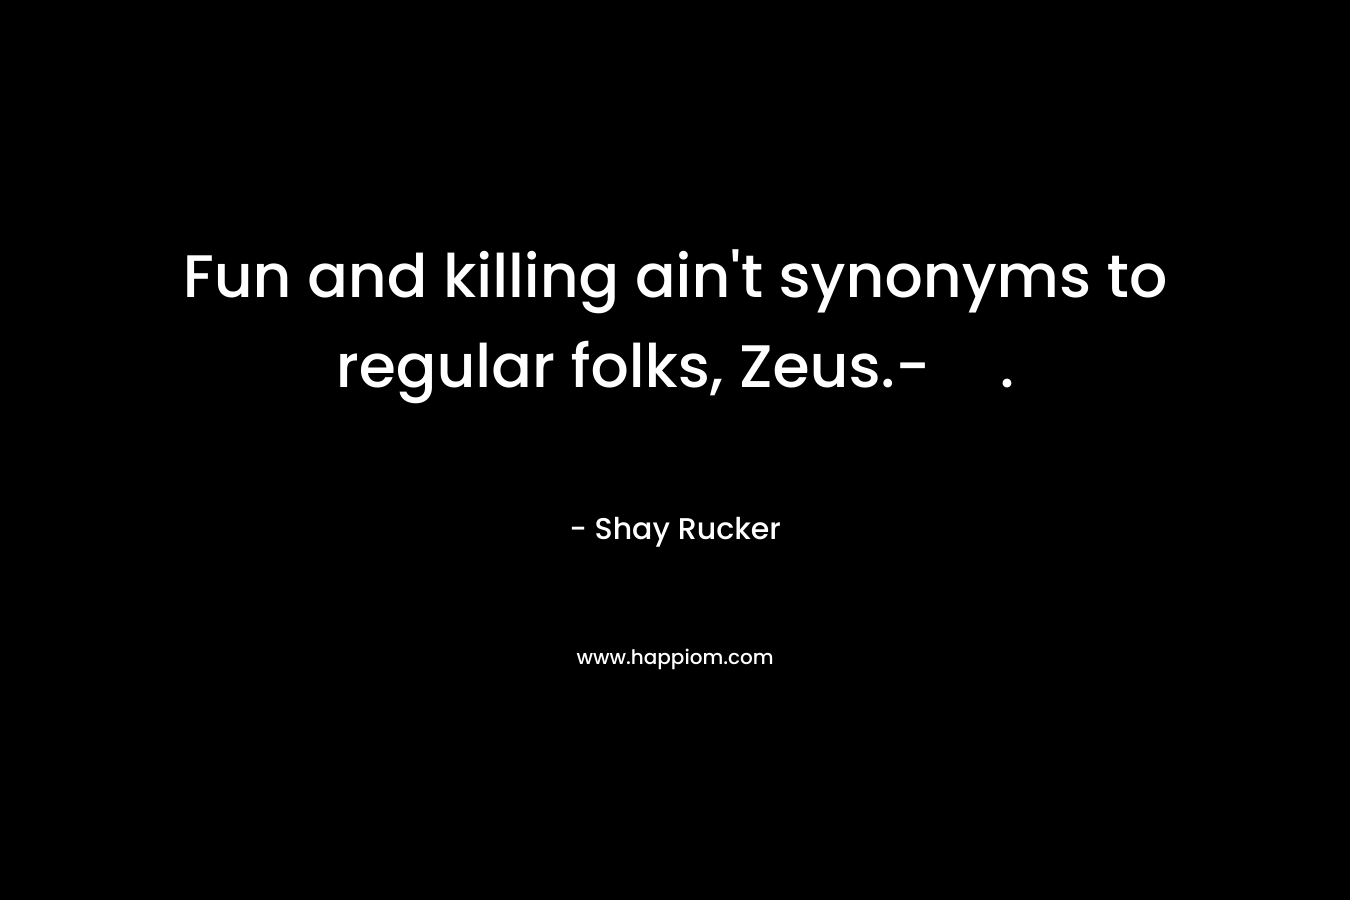 Fun and killing ain’t synonyms to regular folks, Zeus.-. – Shay Rucker